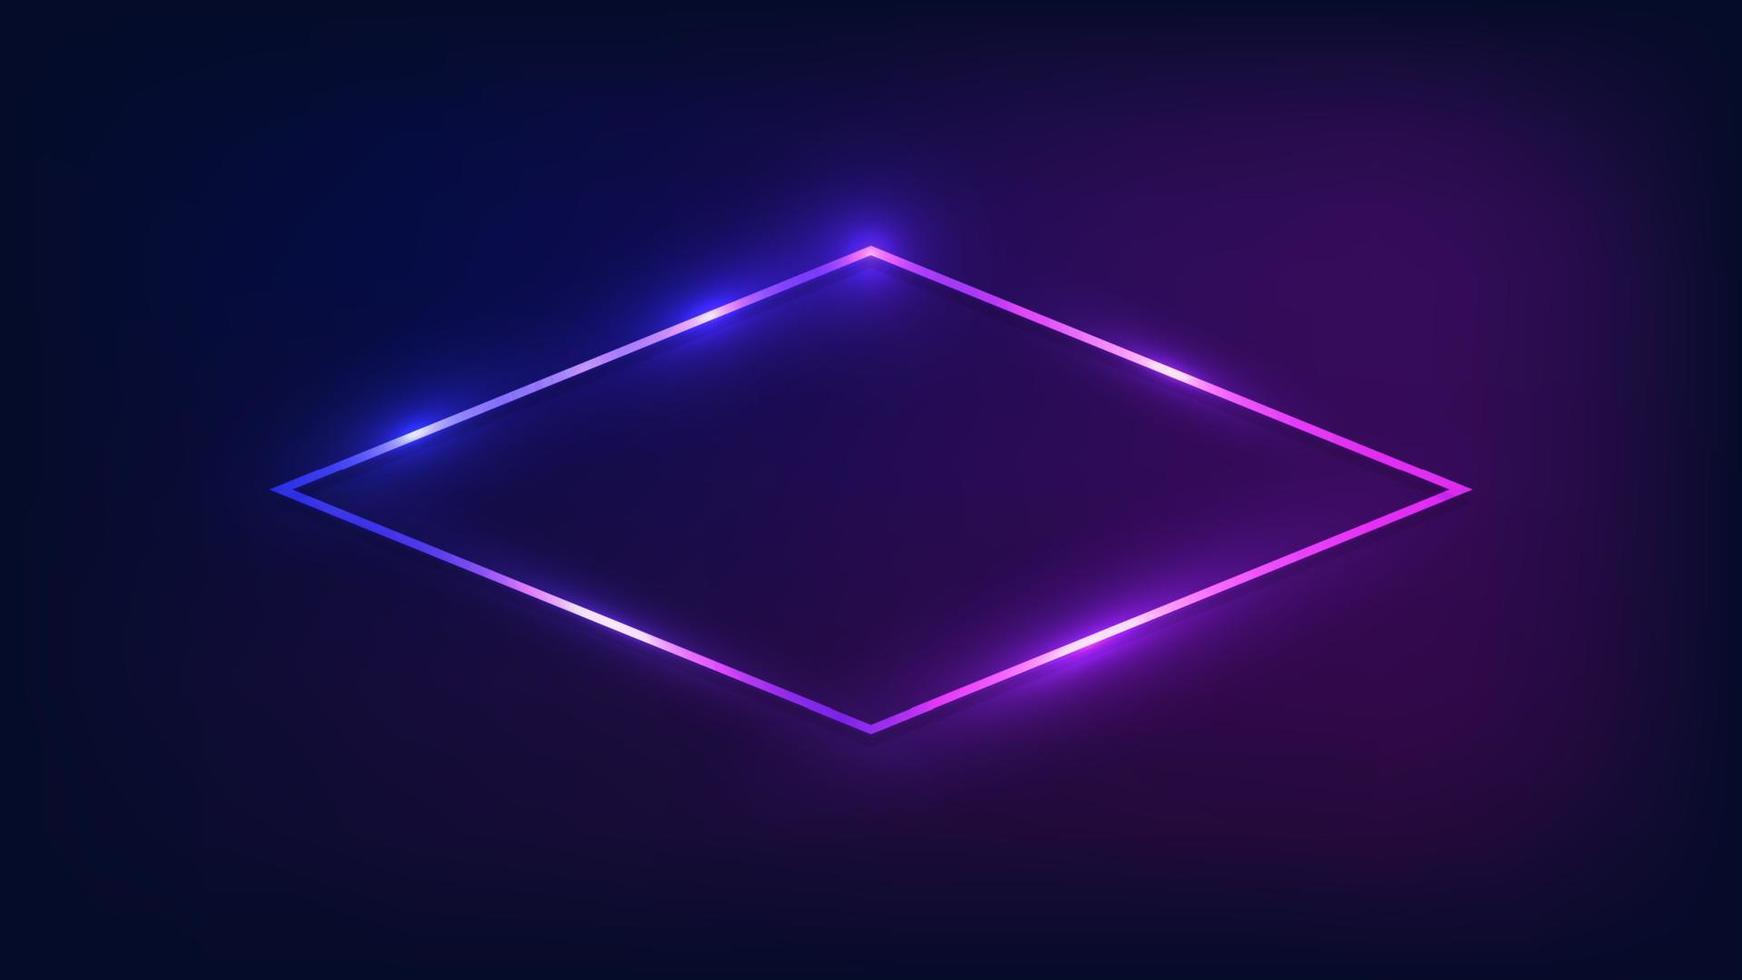 Neon rhombus frame with shining effects on dark background. Empty glowing techno backdrop. Vector illustration.